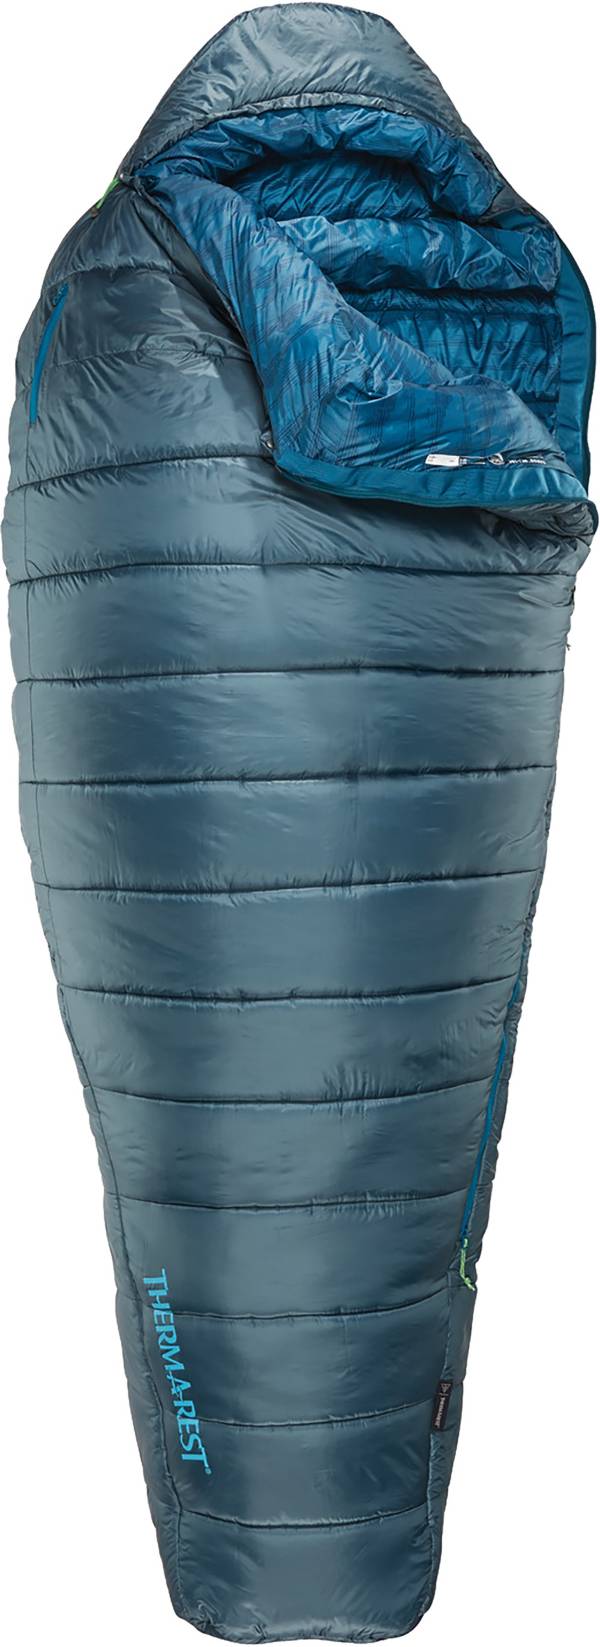 Therm-a-Rest Saros 0 Sleeping Bag product image